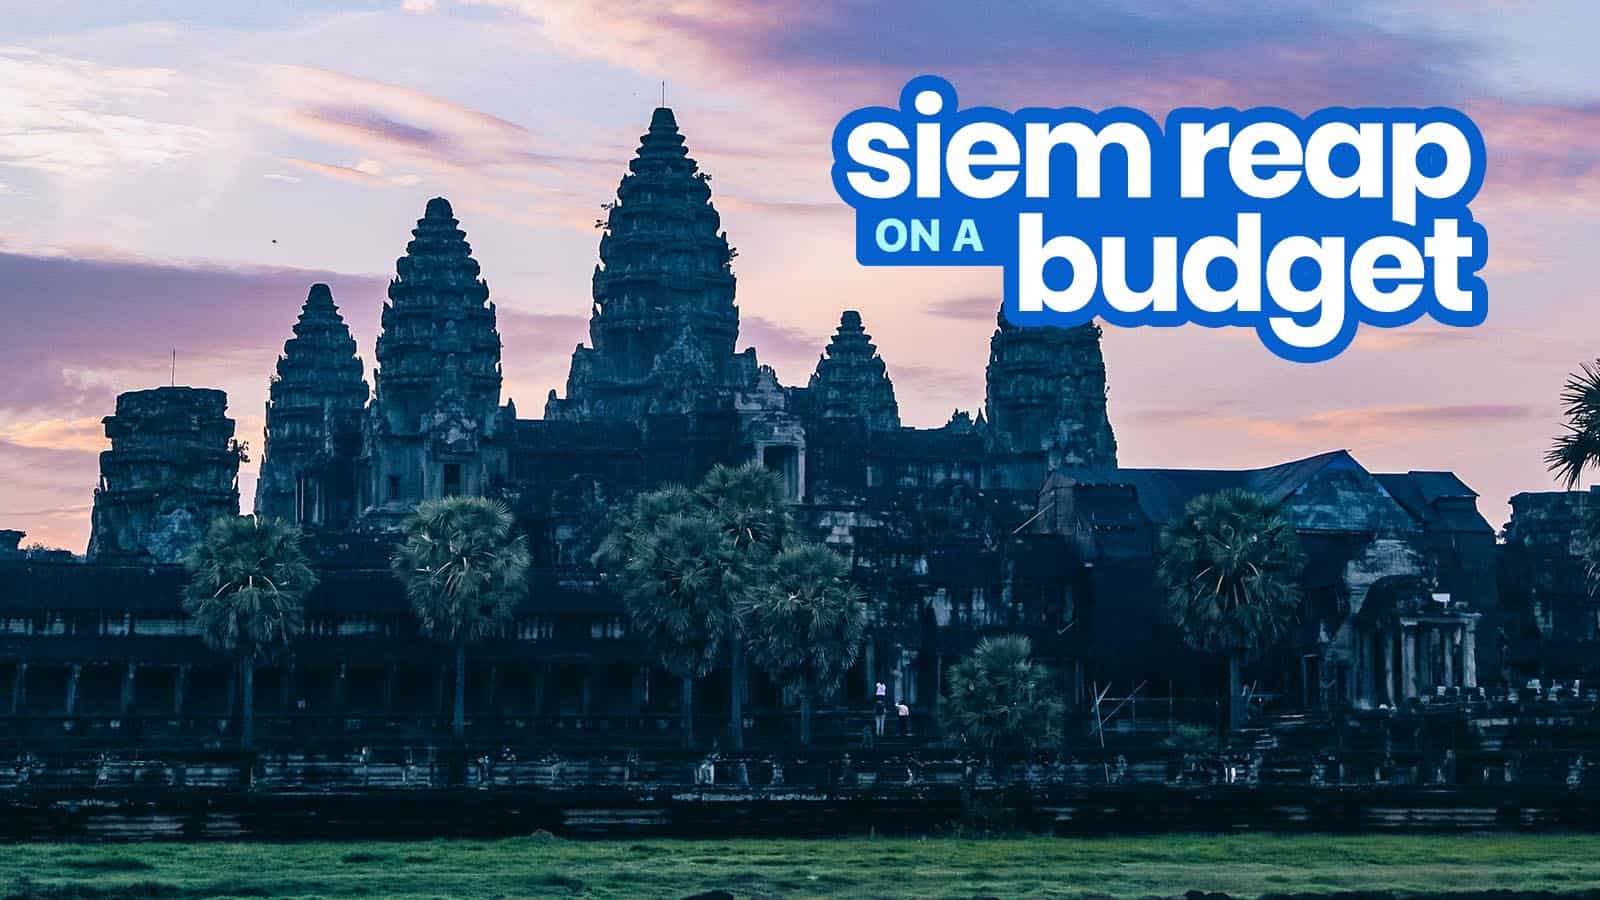 SIEM REAP TRAVEL GUIDE with Budget Itinerary